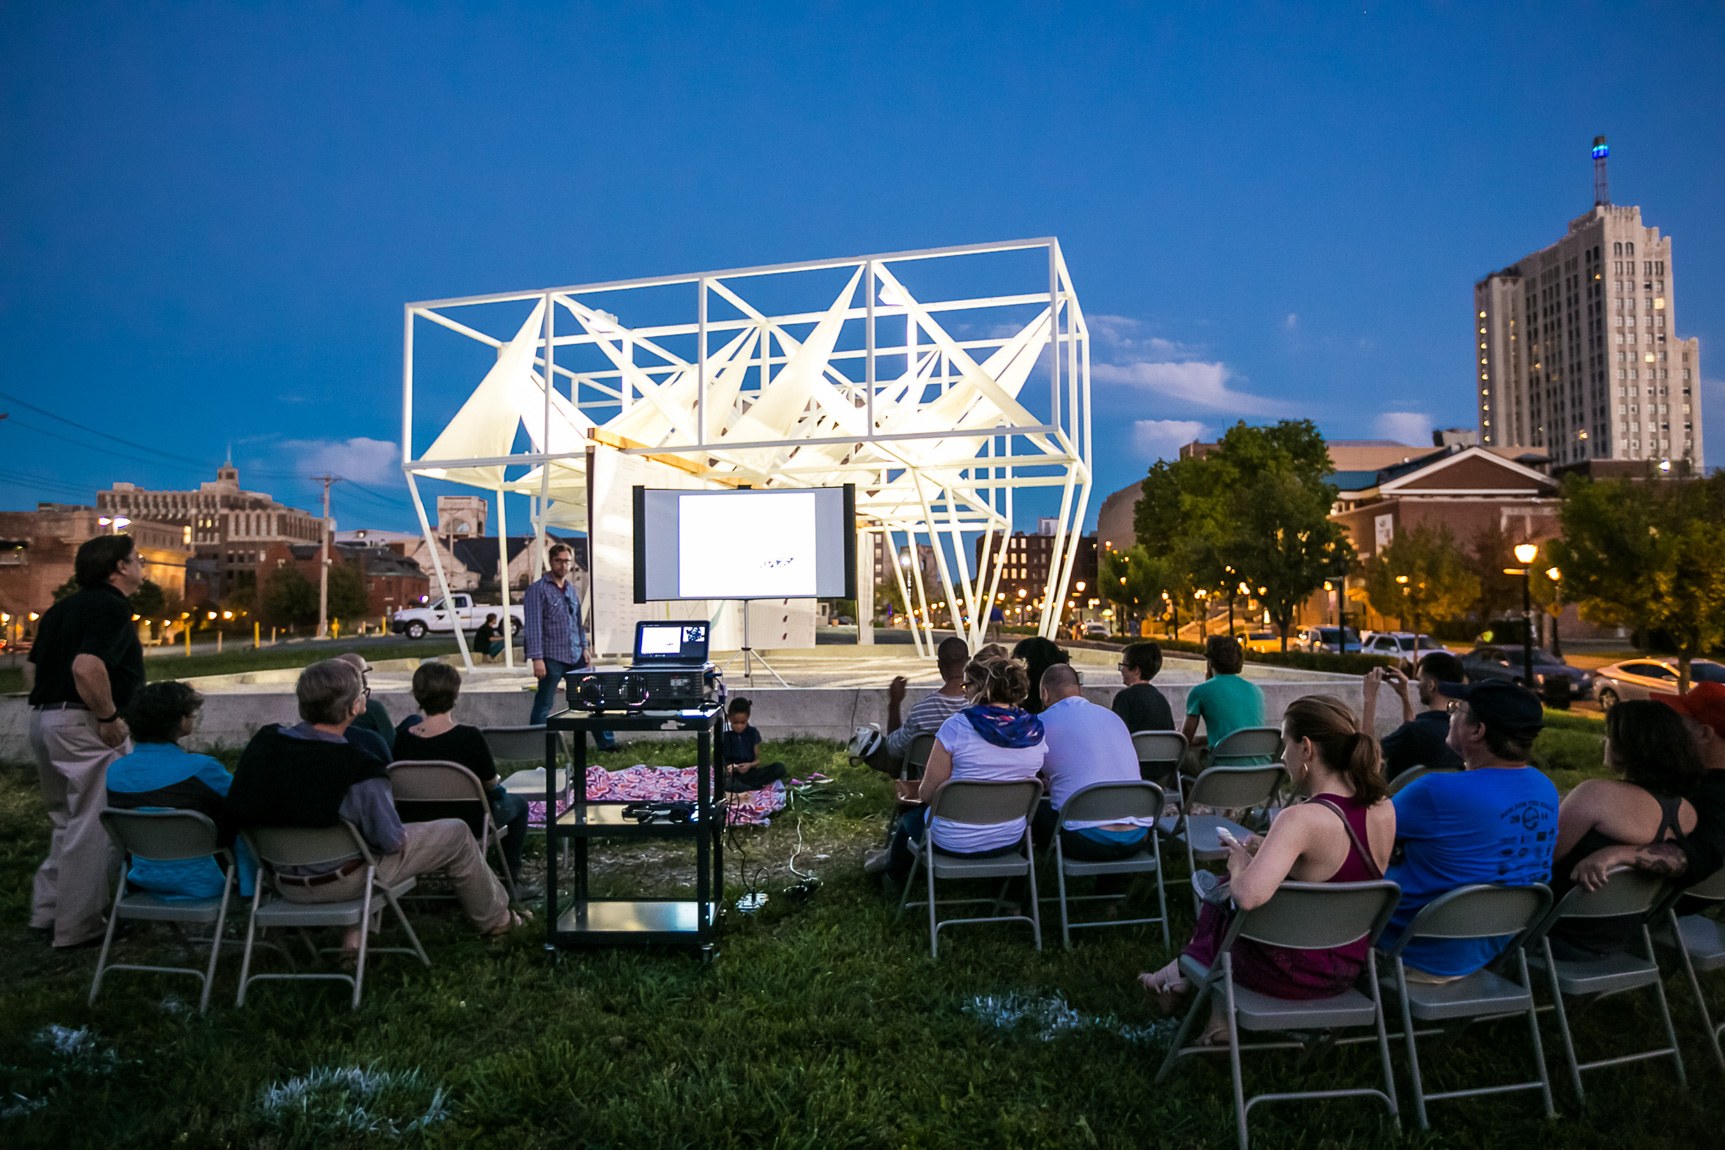 Brent Crittenden gives a lecture in front of a PowerPoint projected on a screen for an audience in front of a large white installation.